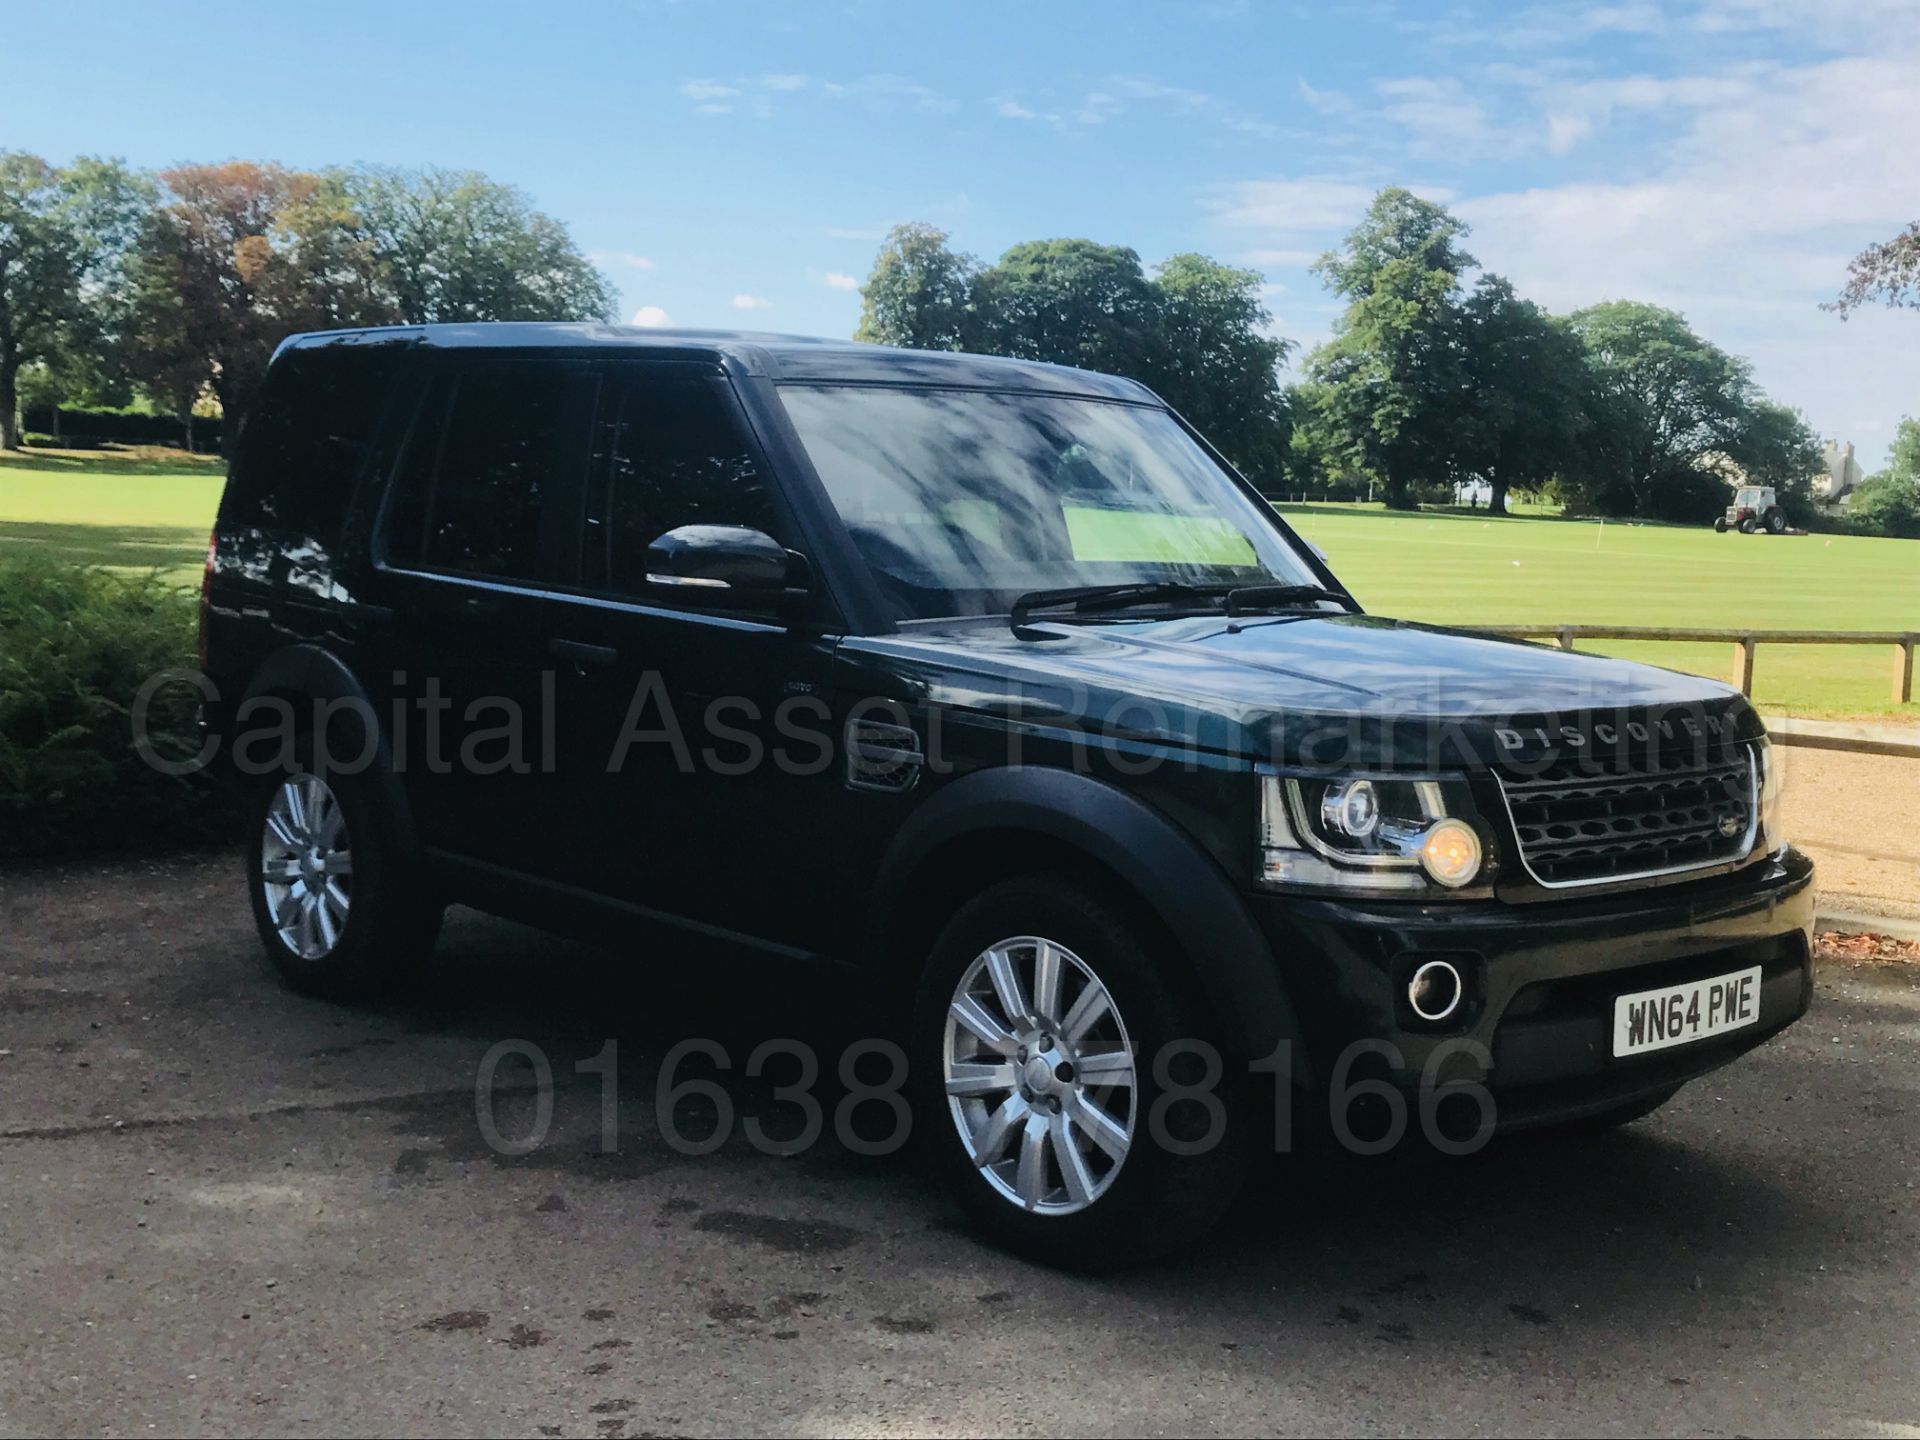 LAND ROVER DISCOVERY *XS EDITION* (2014) '3.0 SDV6 - 225 BHP- 8 SPEED AUTO' *MASSIVE SPEC* (1 OWNER) - Image 2 of 45